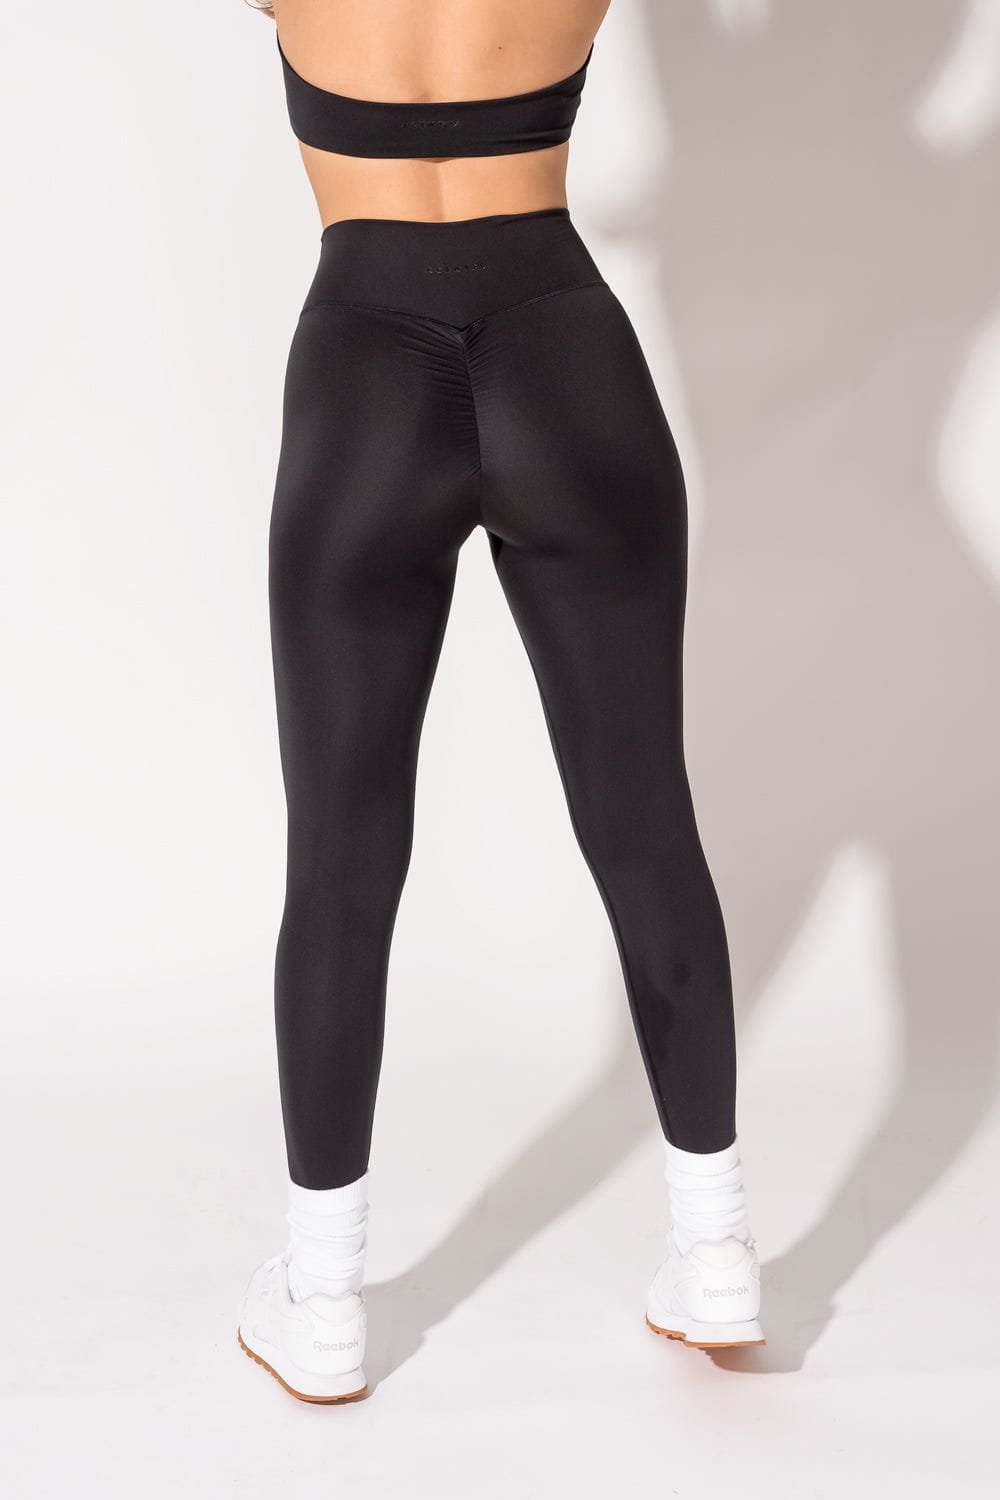 Agent84 V-Booty Buttersoft High Rise Leggings In